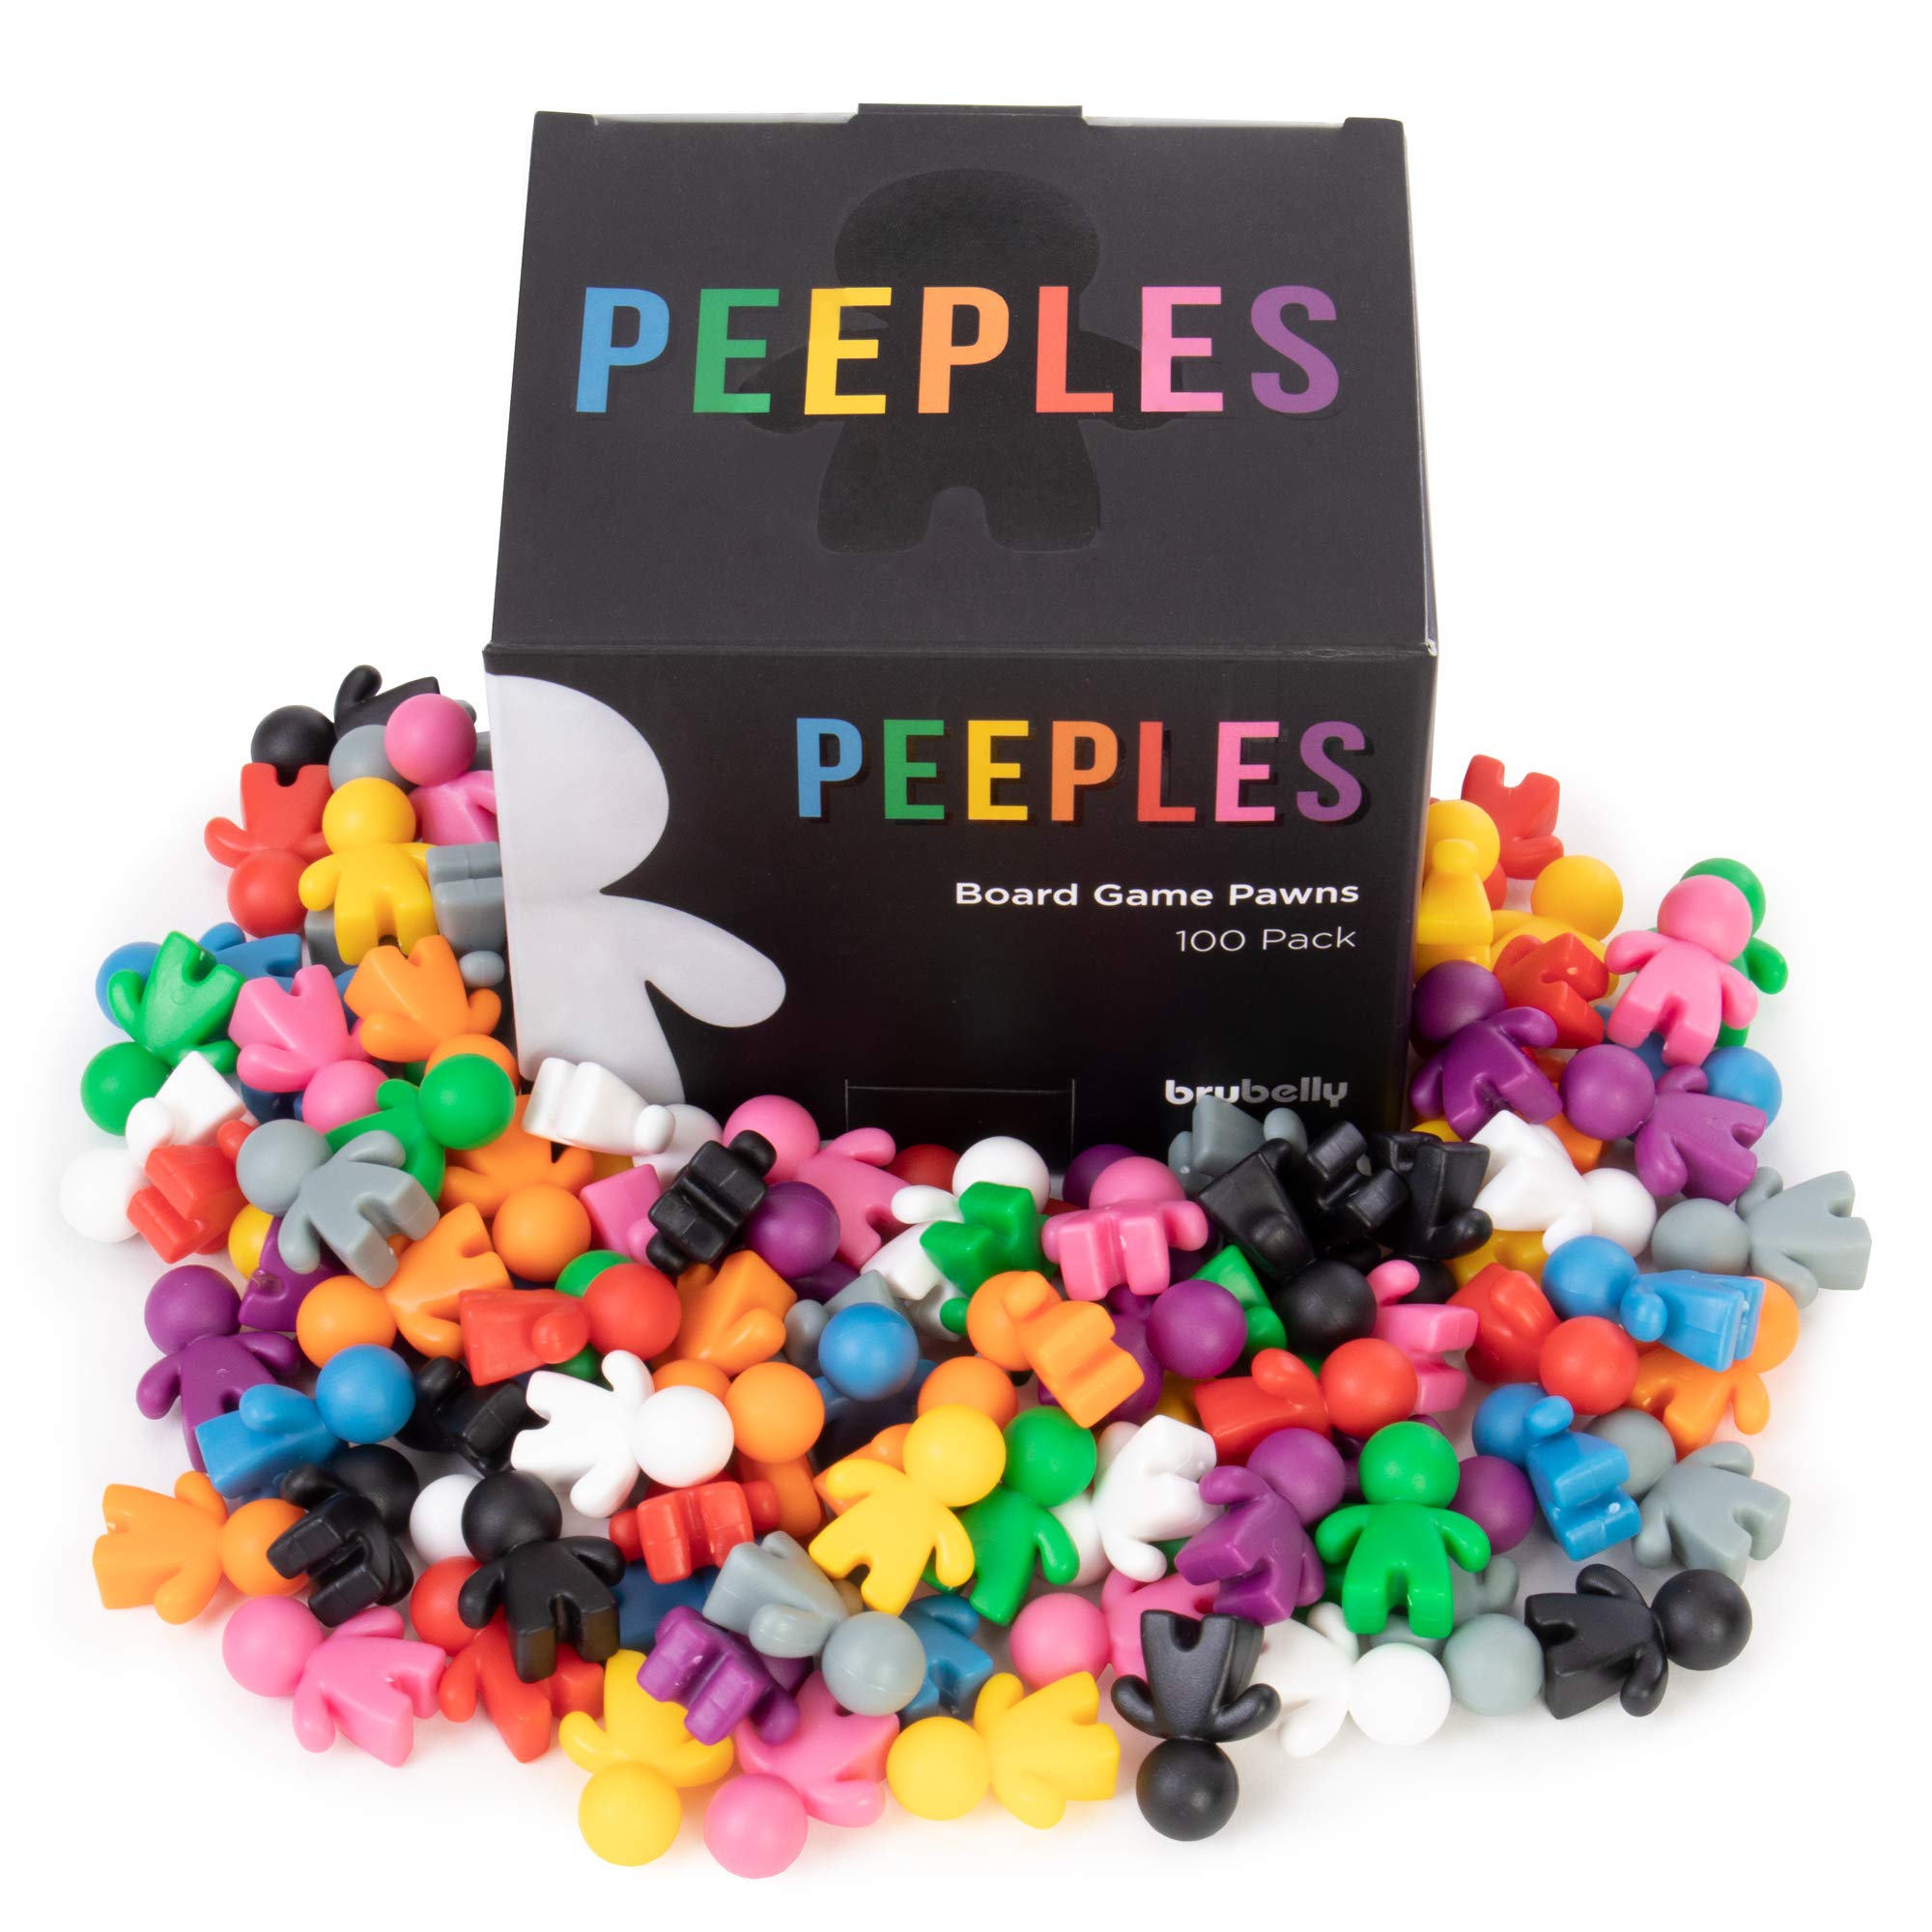 Peeples Board Game Pawns (100-pack) - 10 Color Assortment